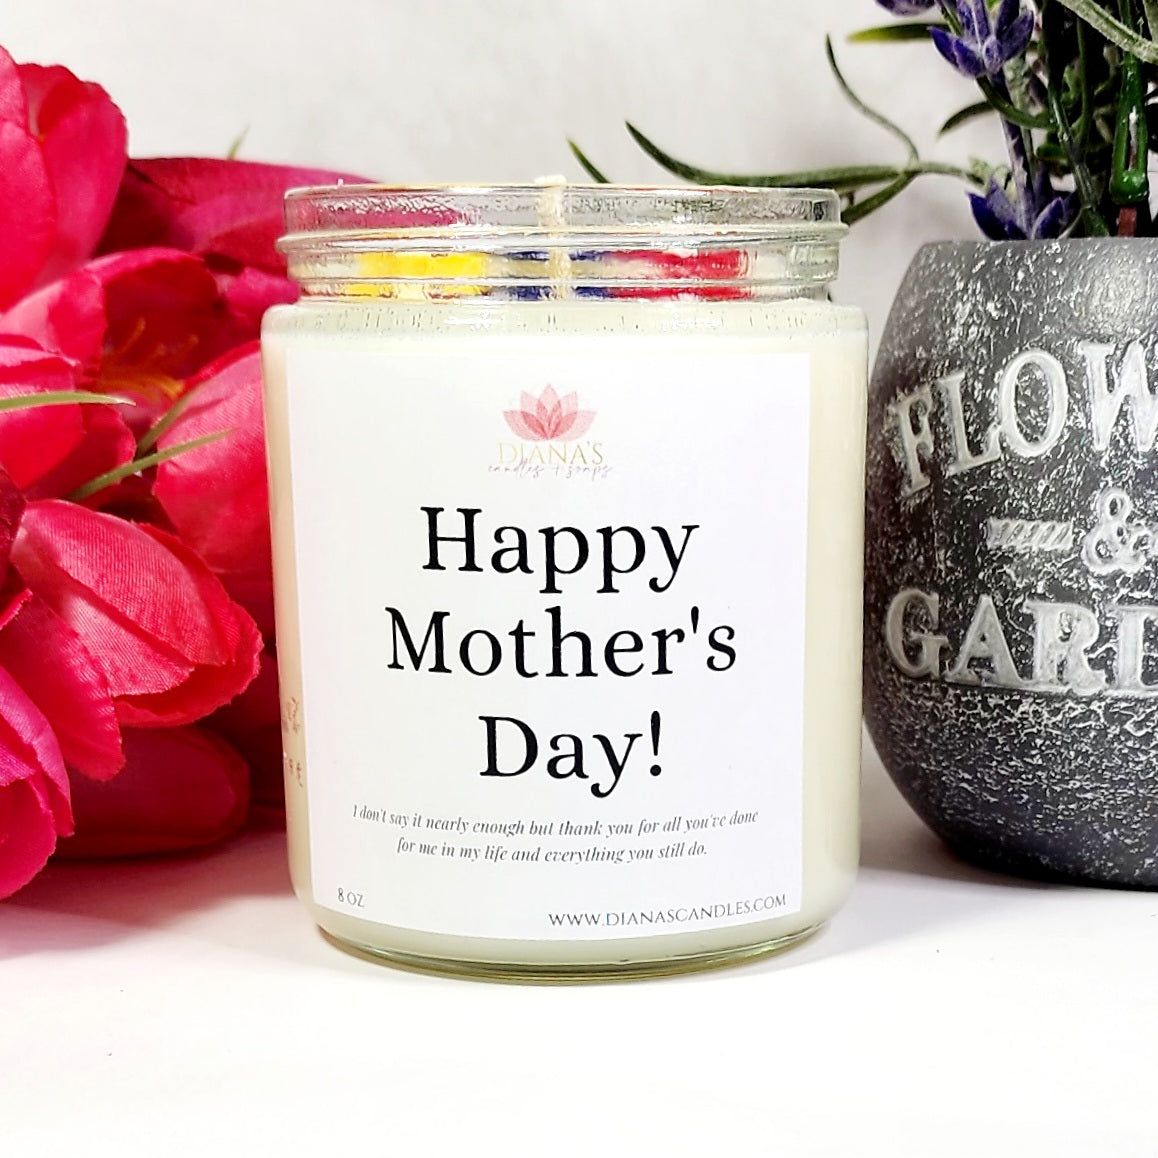 Happy Mother's Day Candle Diana's Candles and Soaps 